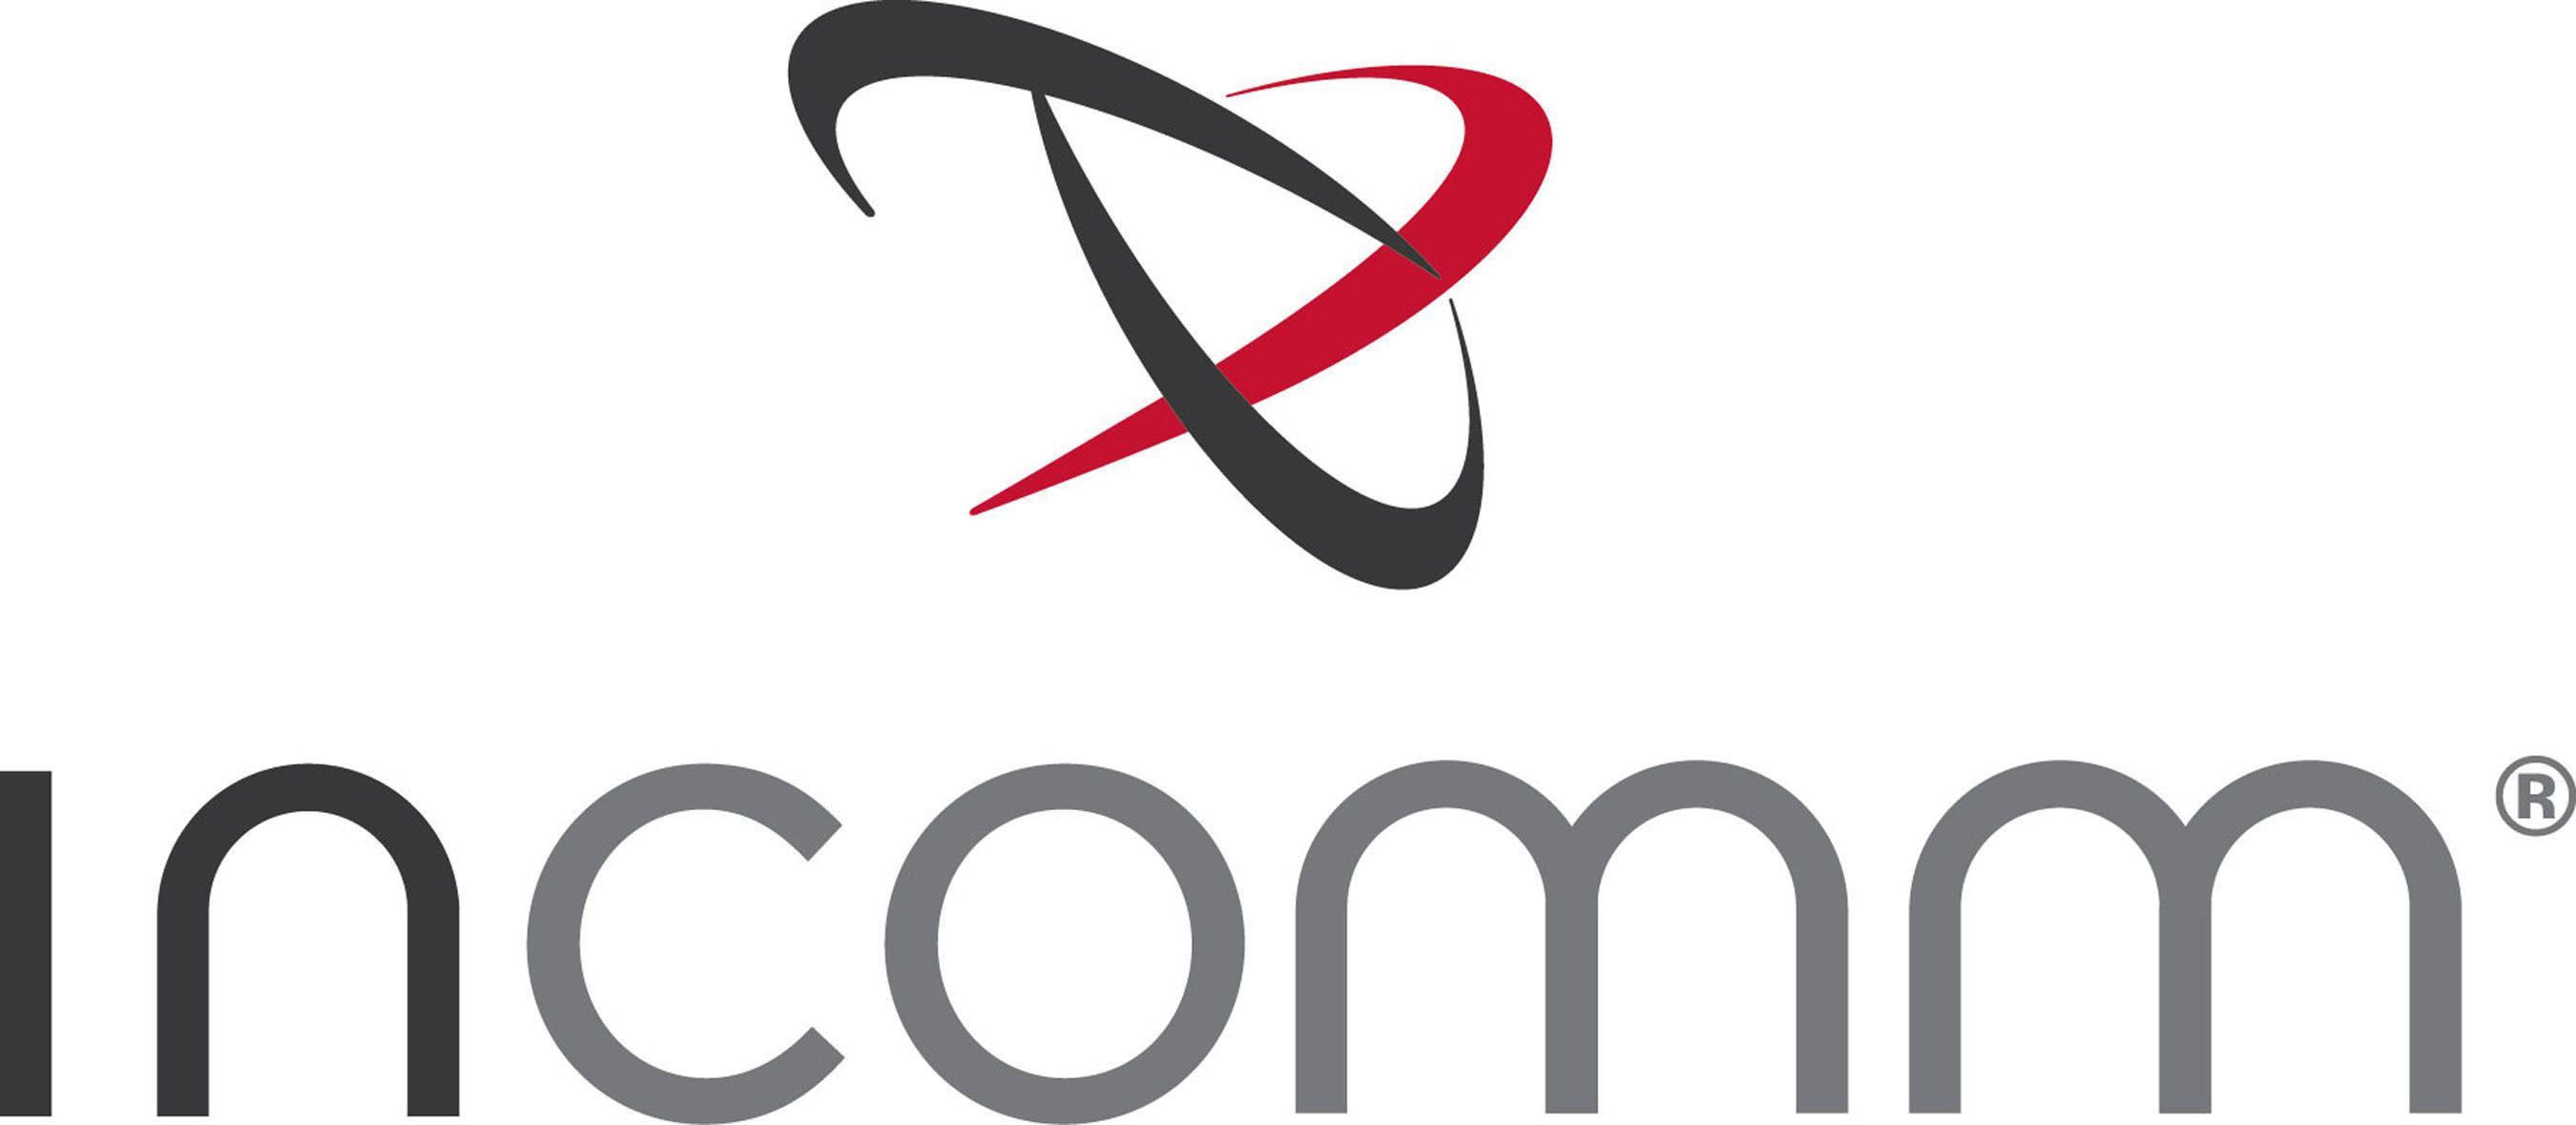 Inncomm Logo - InComm Internal Holiday Data Shows Strong Growth in Digital Gift ...